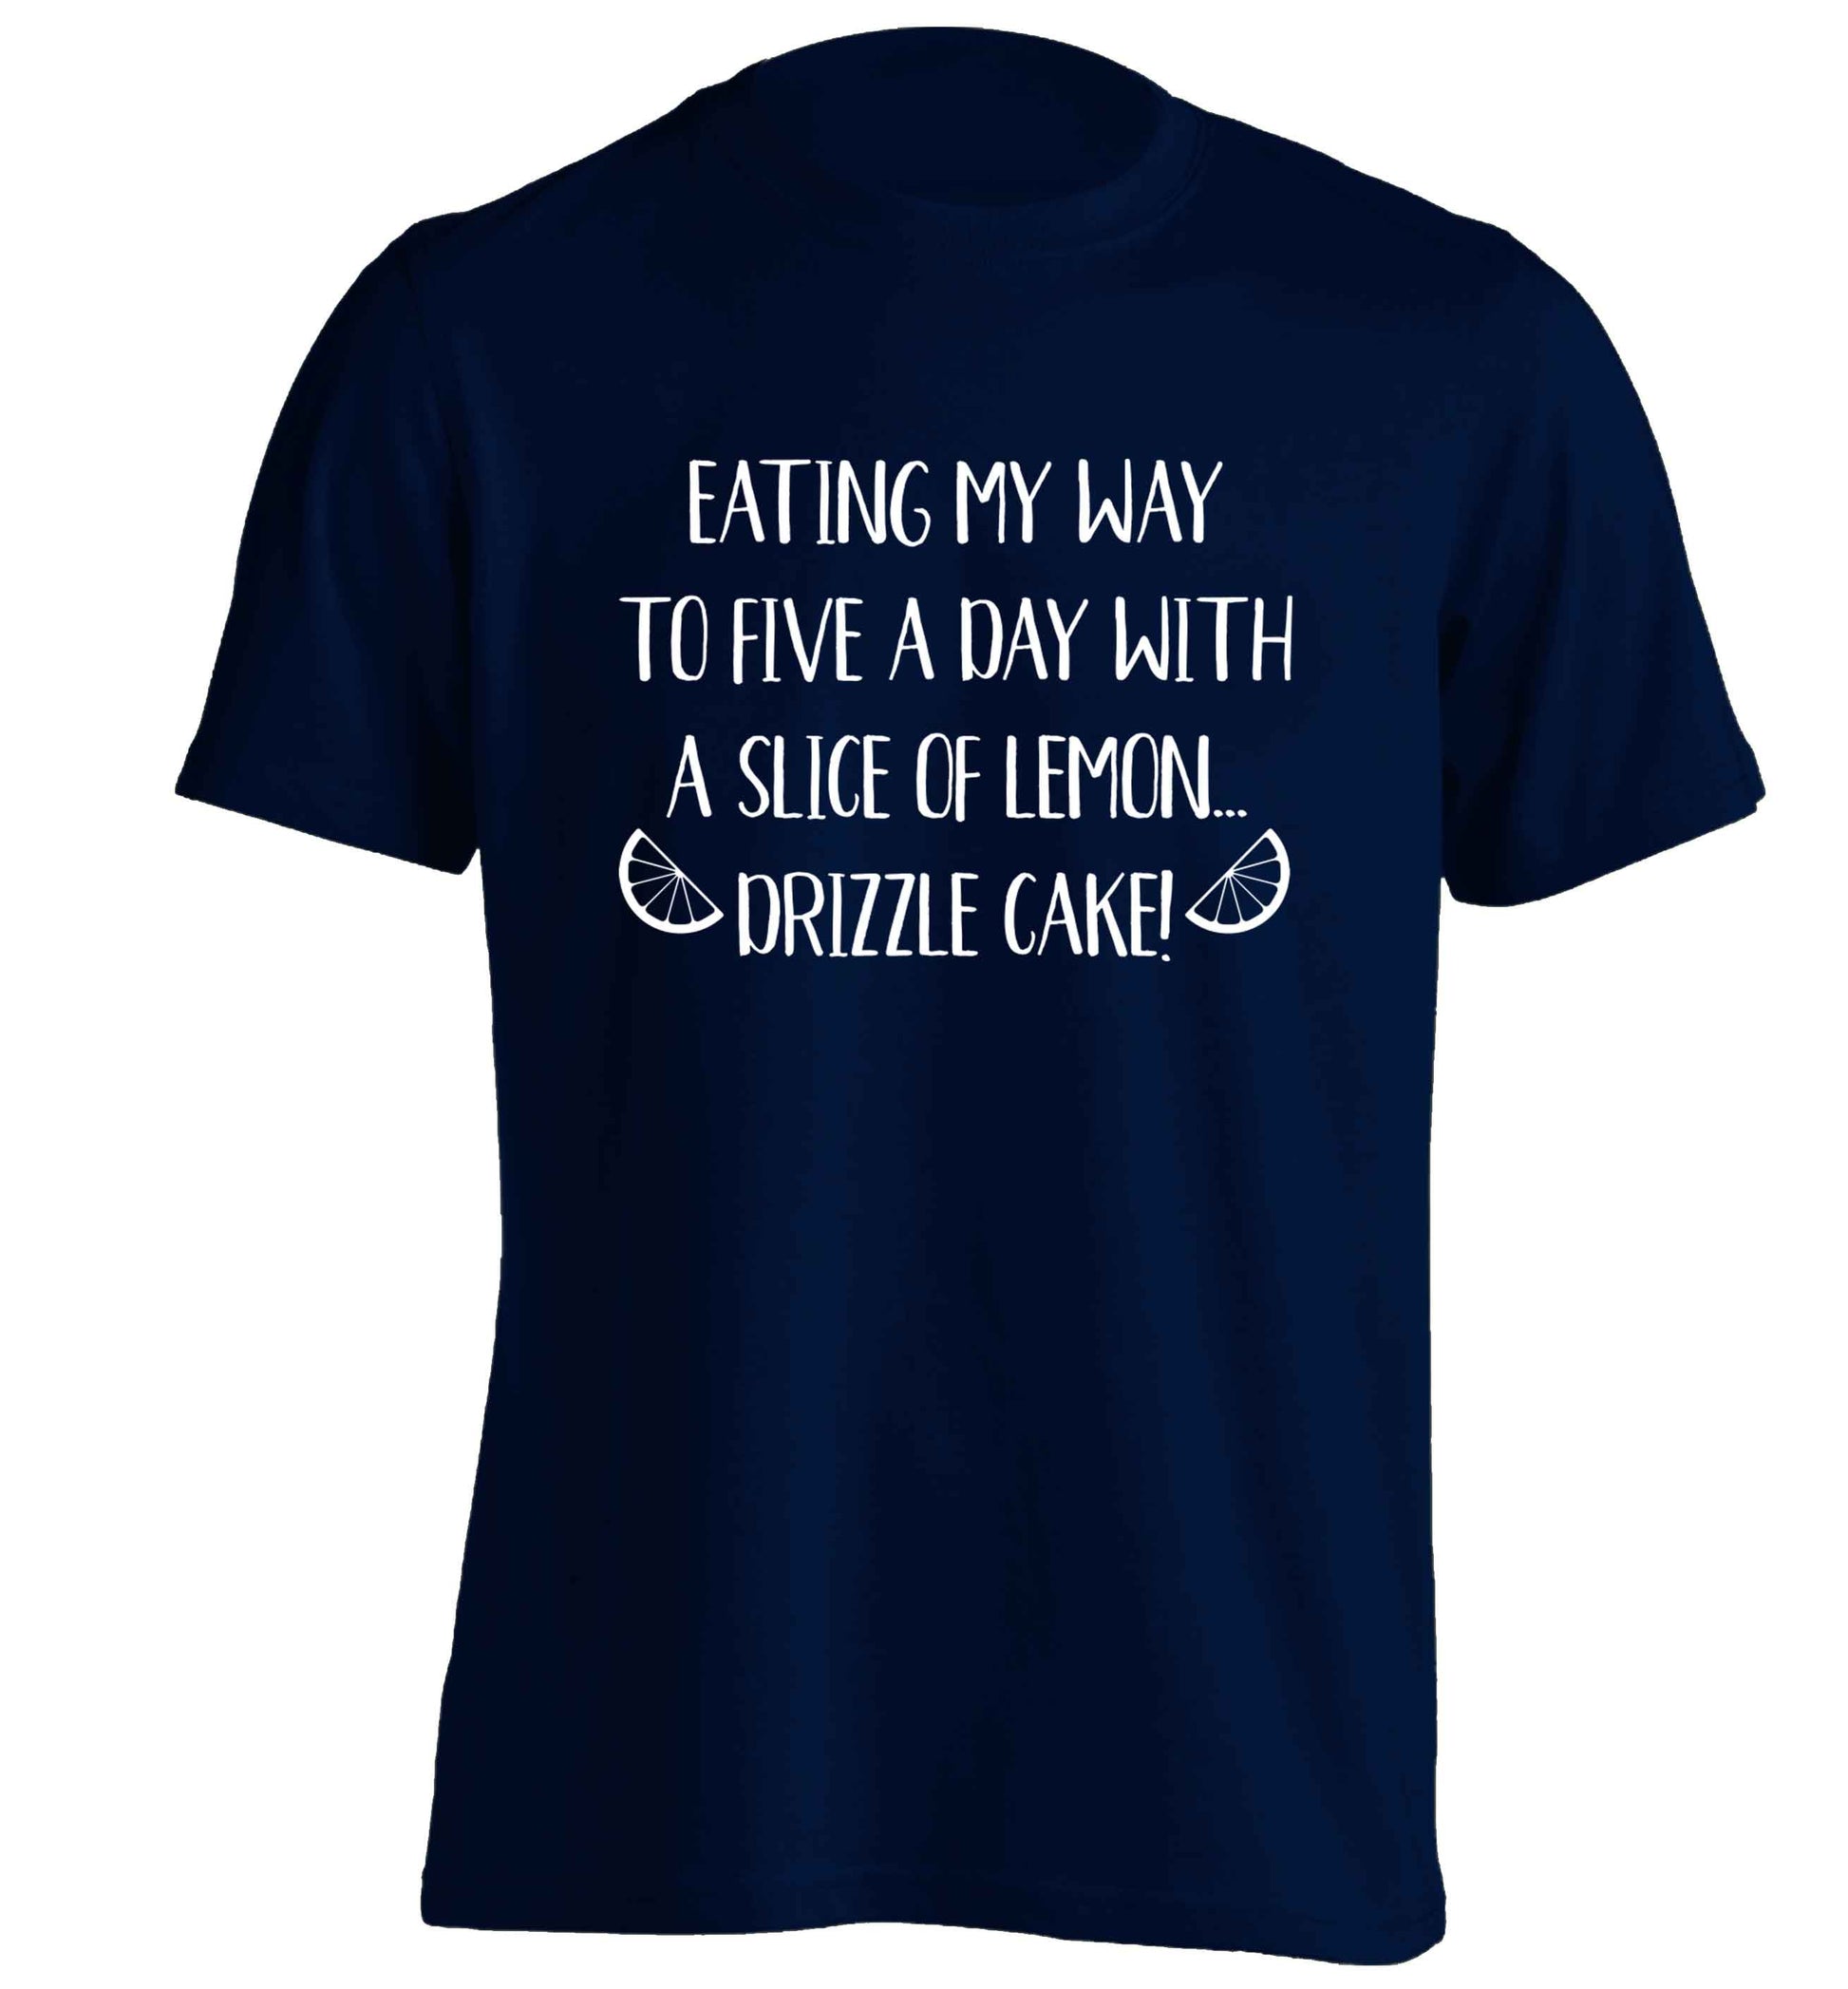 Eating my way to five a day with a slice of lemon drizzle cake day adults unisex navy Tshirt 2XL